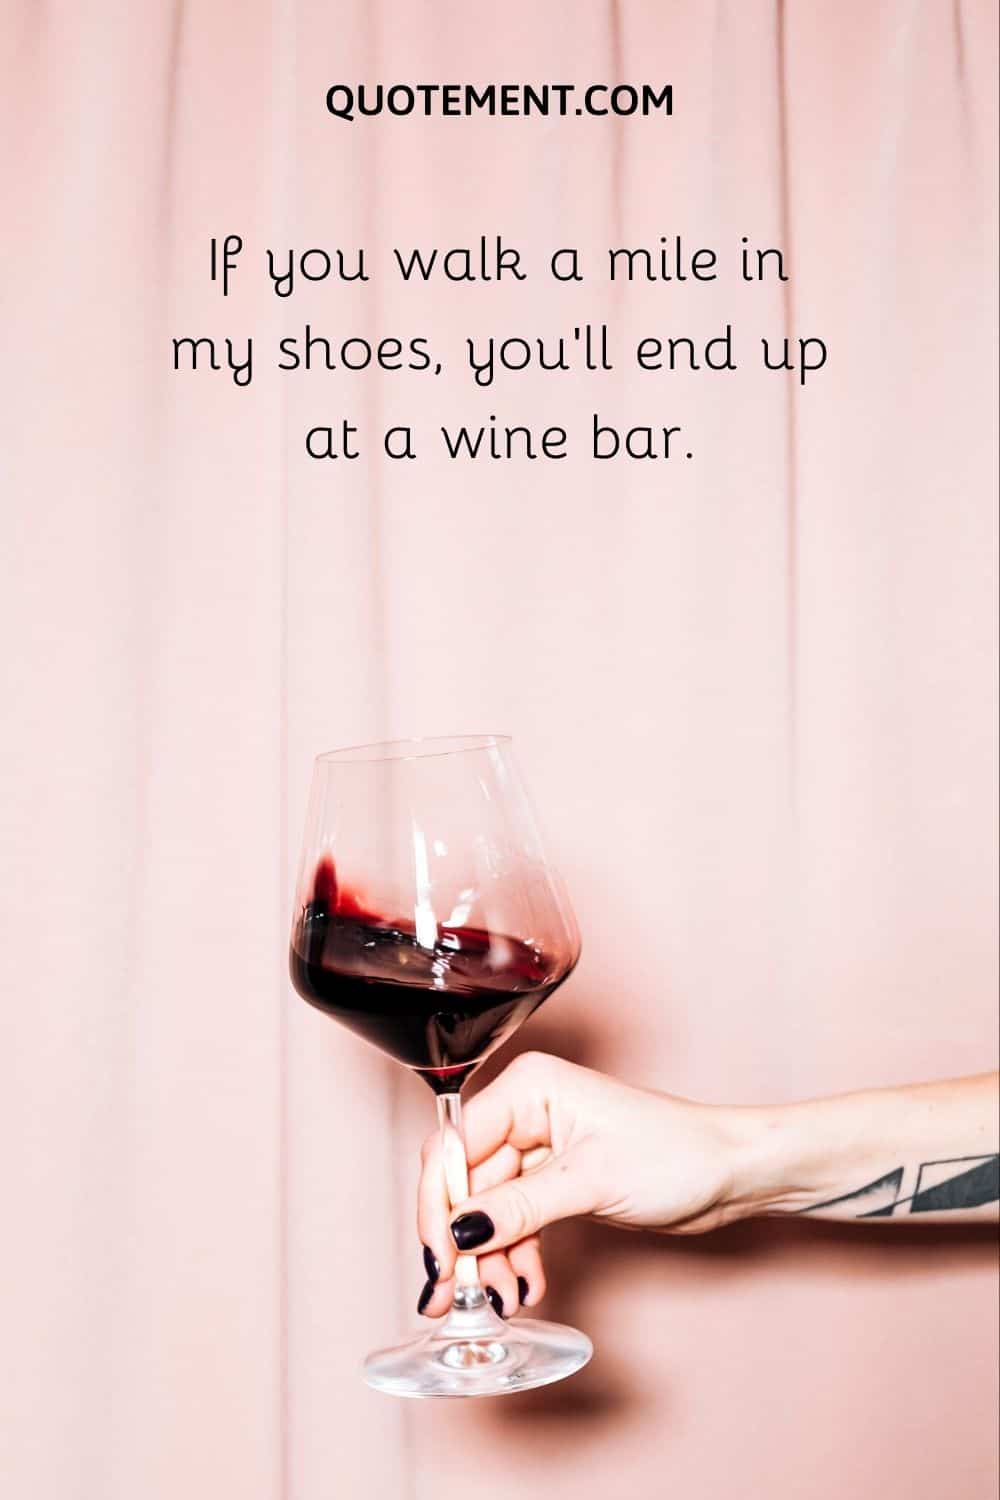 If you walk a mile in my shoes, you’ll end up at a wine bar